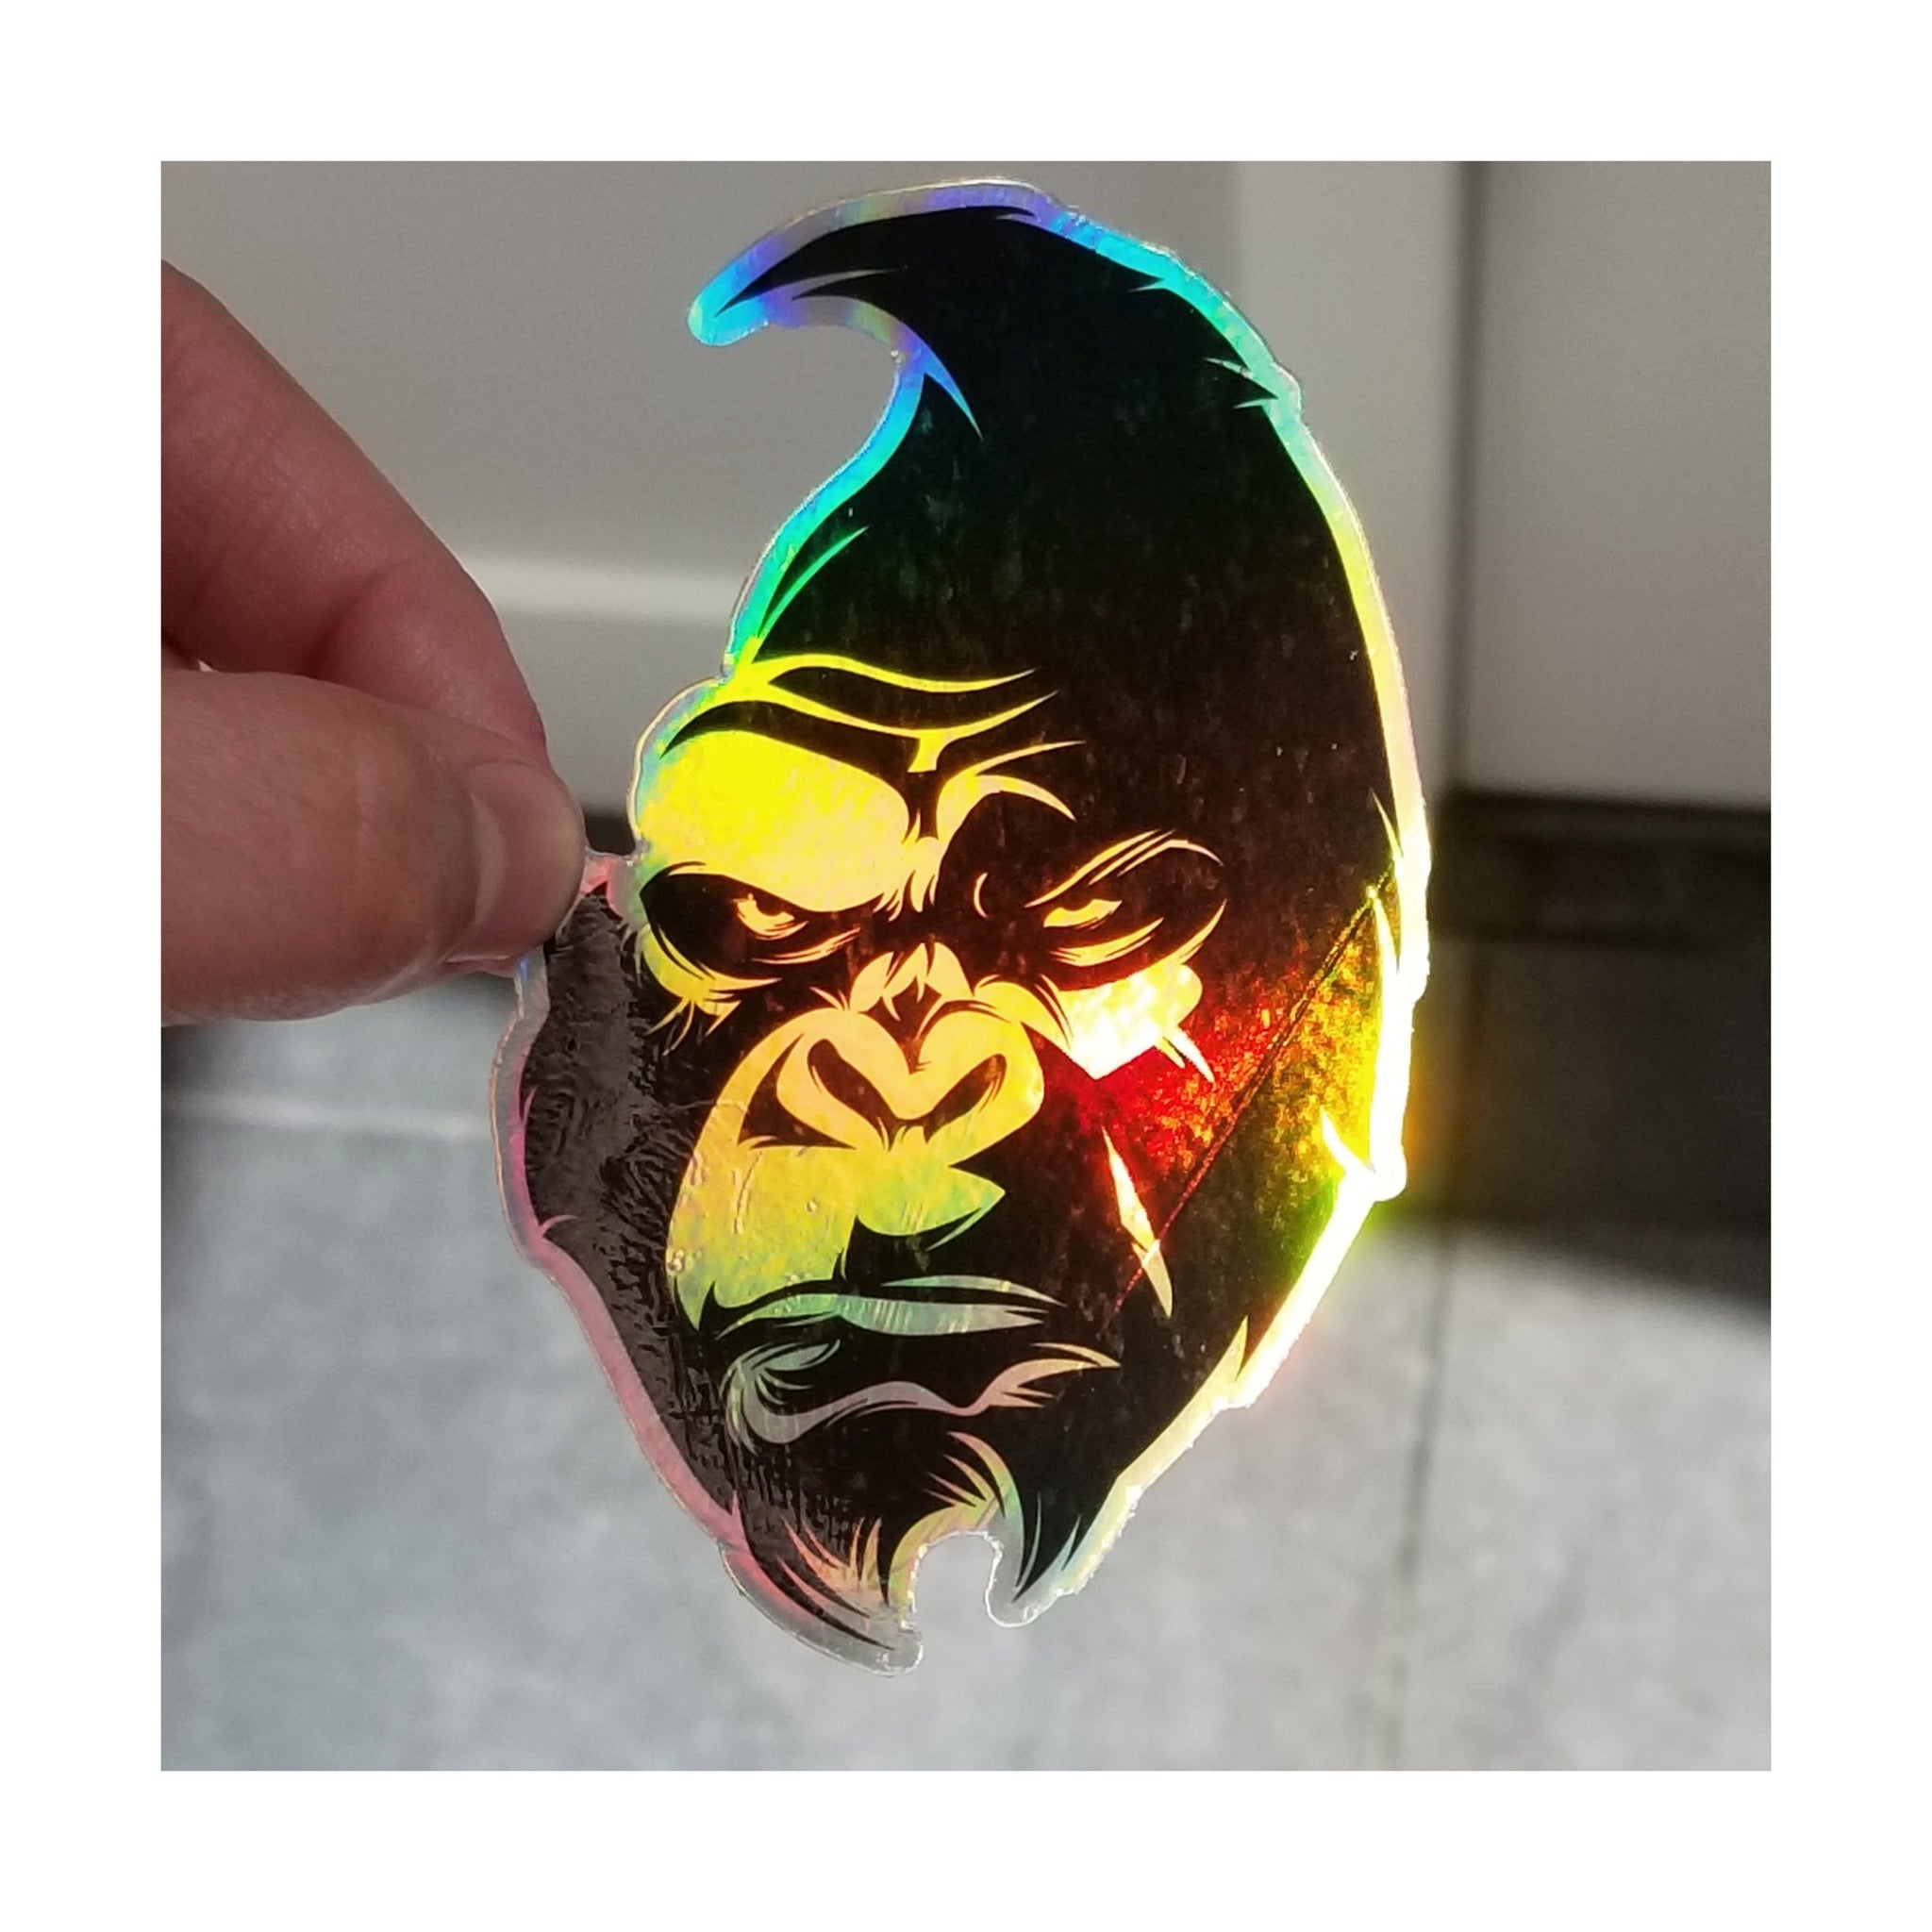 Angry Gorilla Sticker Holographic Sticker Ape Hologram Decal 3.75" Silverback